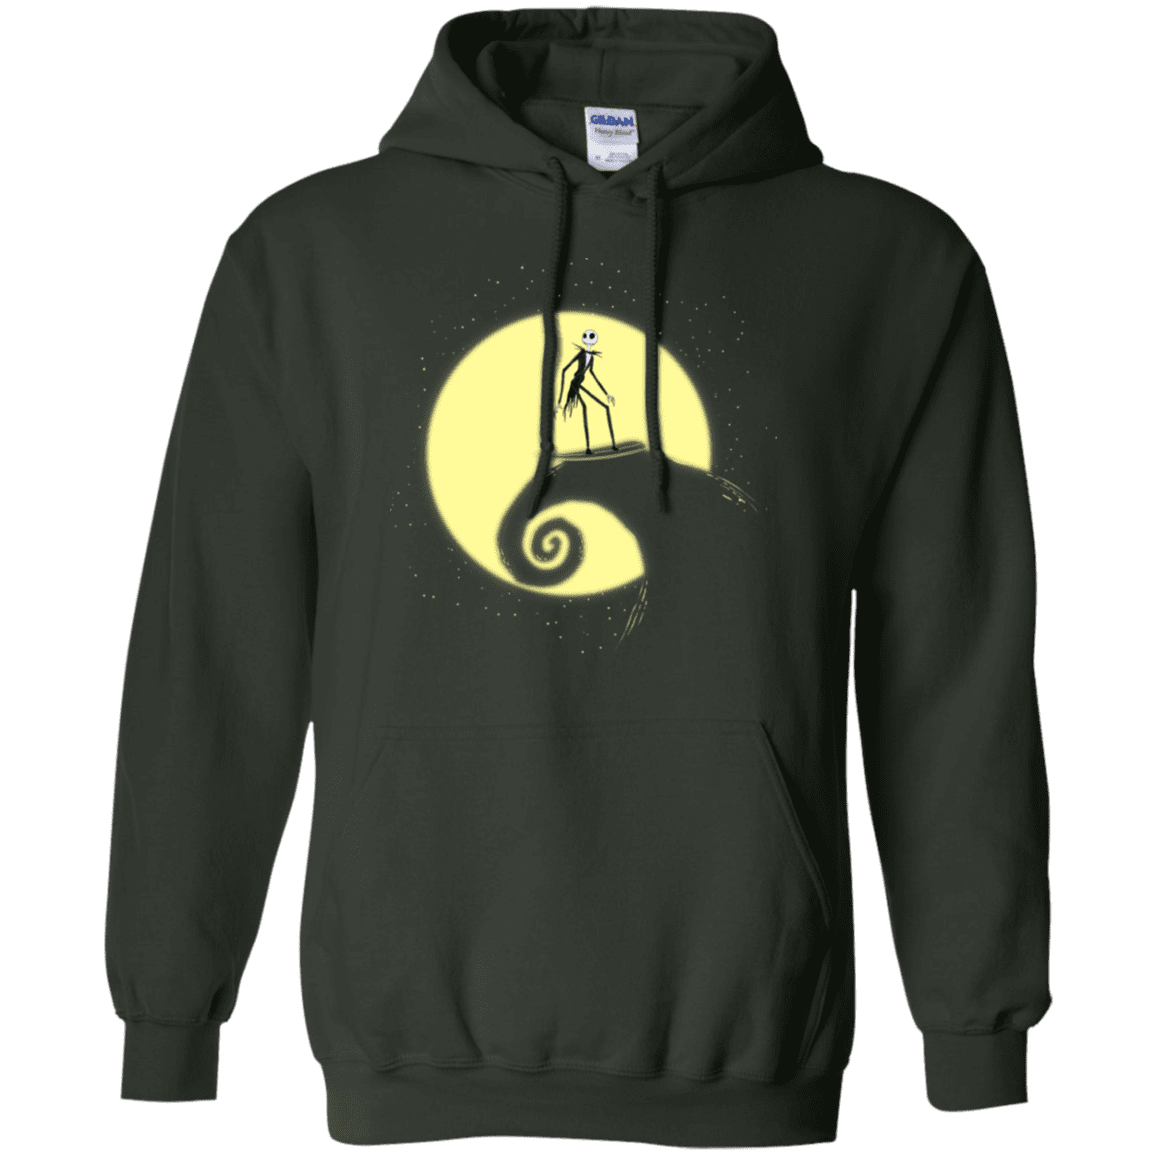 Sweatshirts Forest Green / S The Night Before Surfing Pullover Hoodie